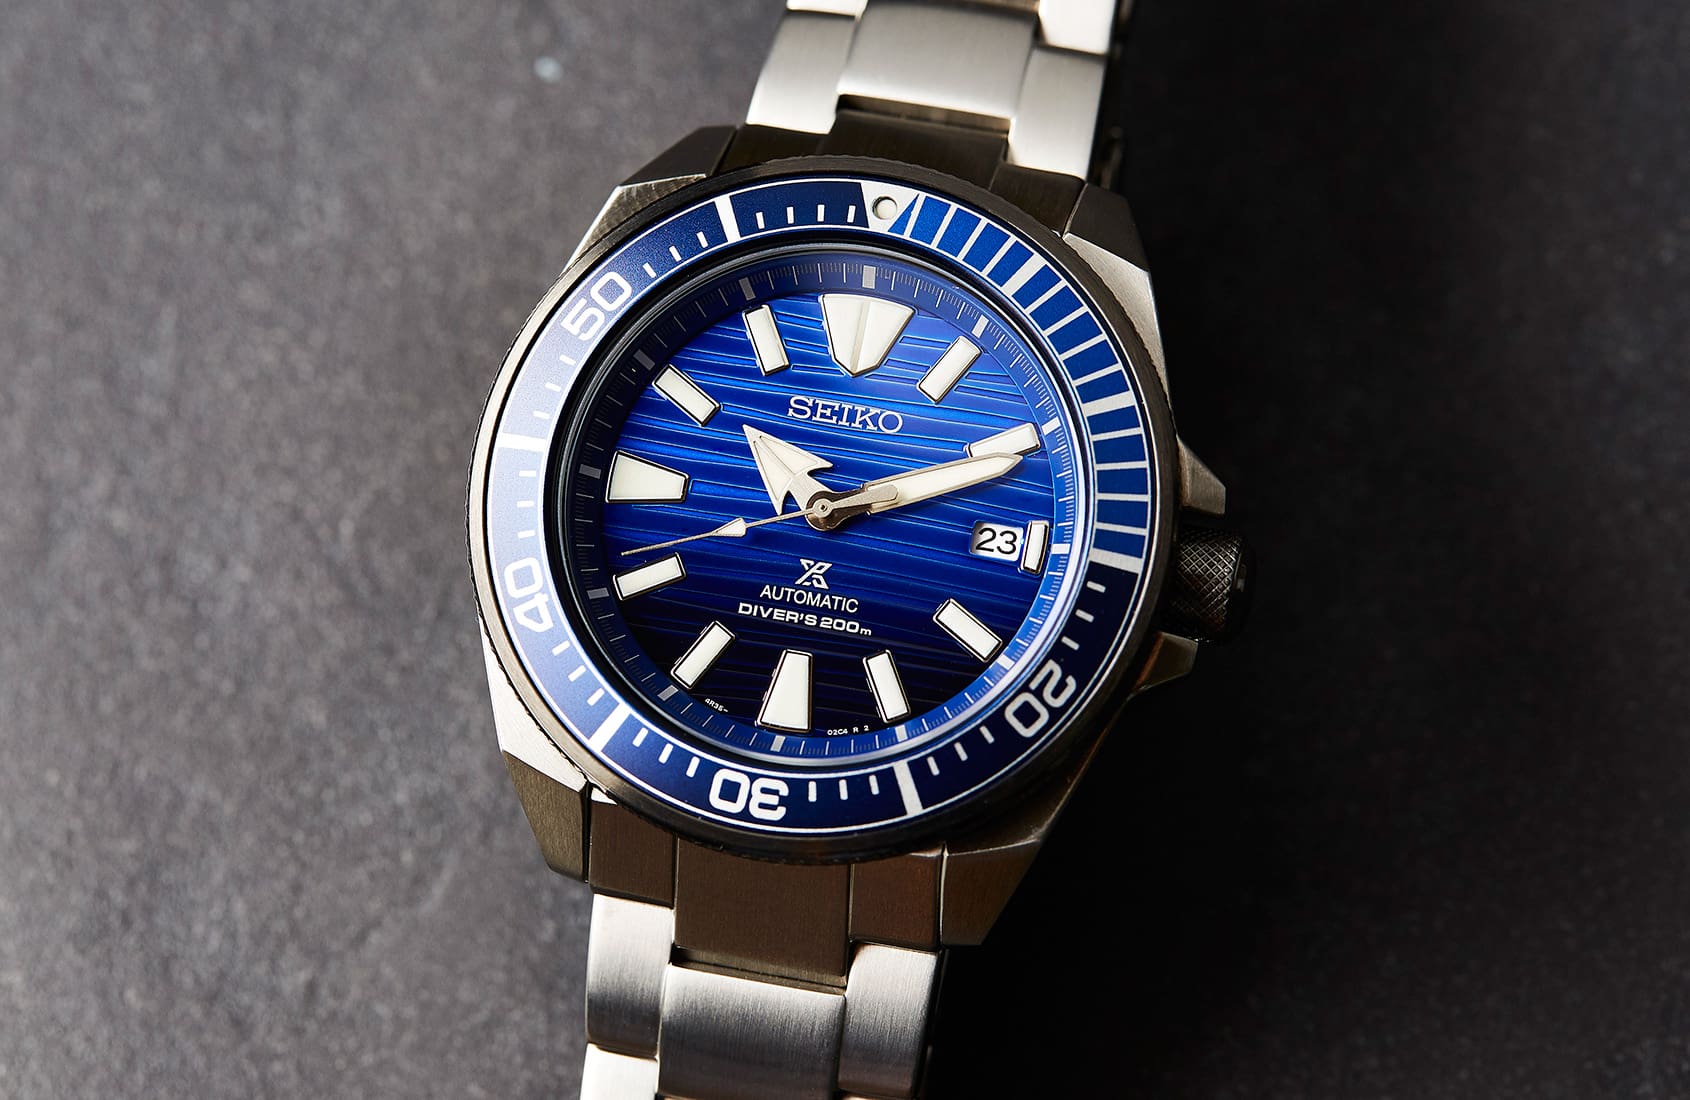 Battle for the blue with the Seiko Samurai ‘Save The Ocean’ SRPC93K